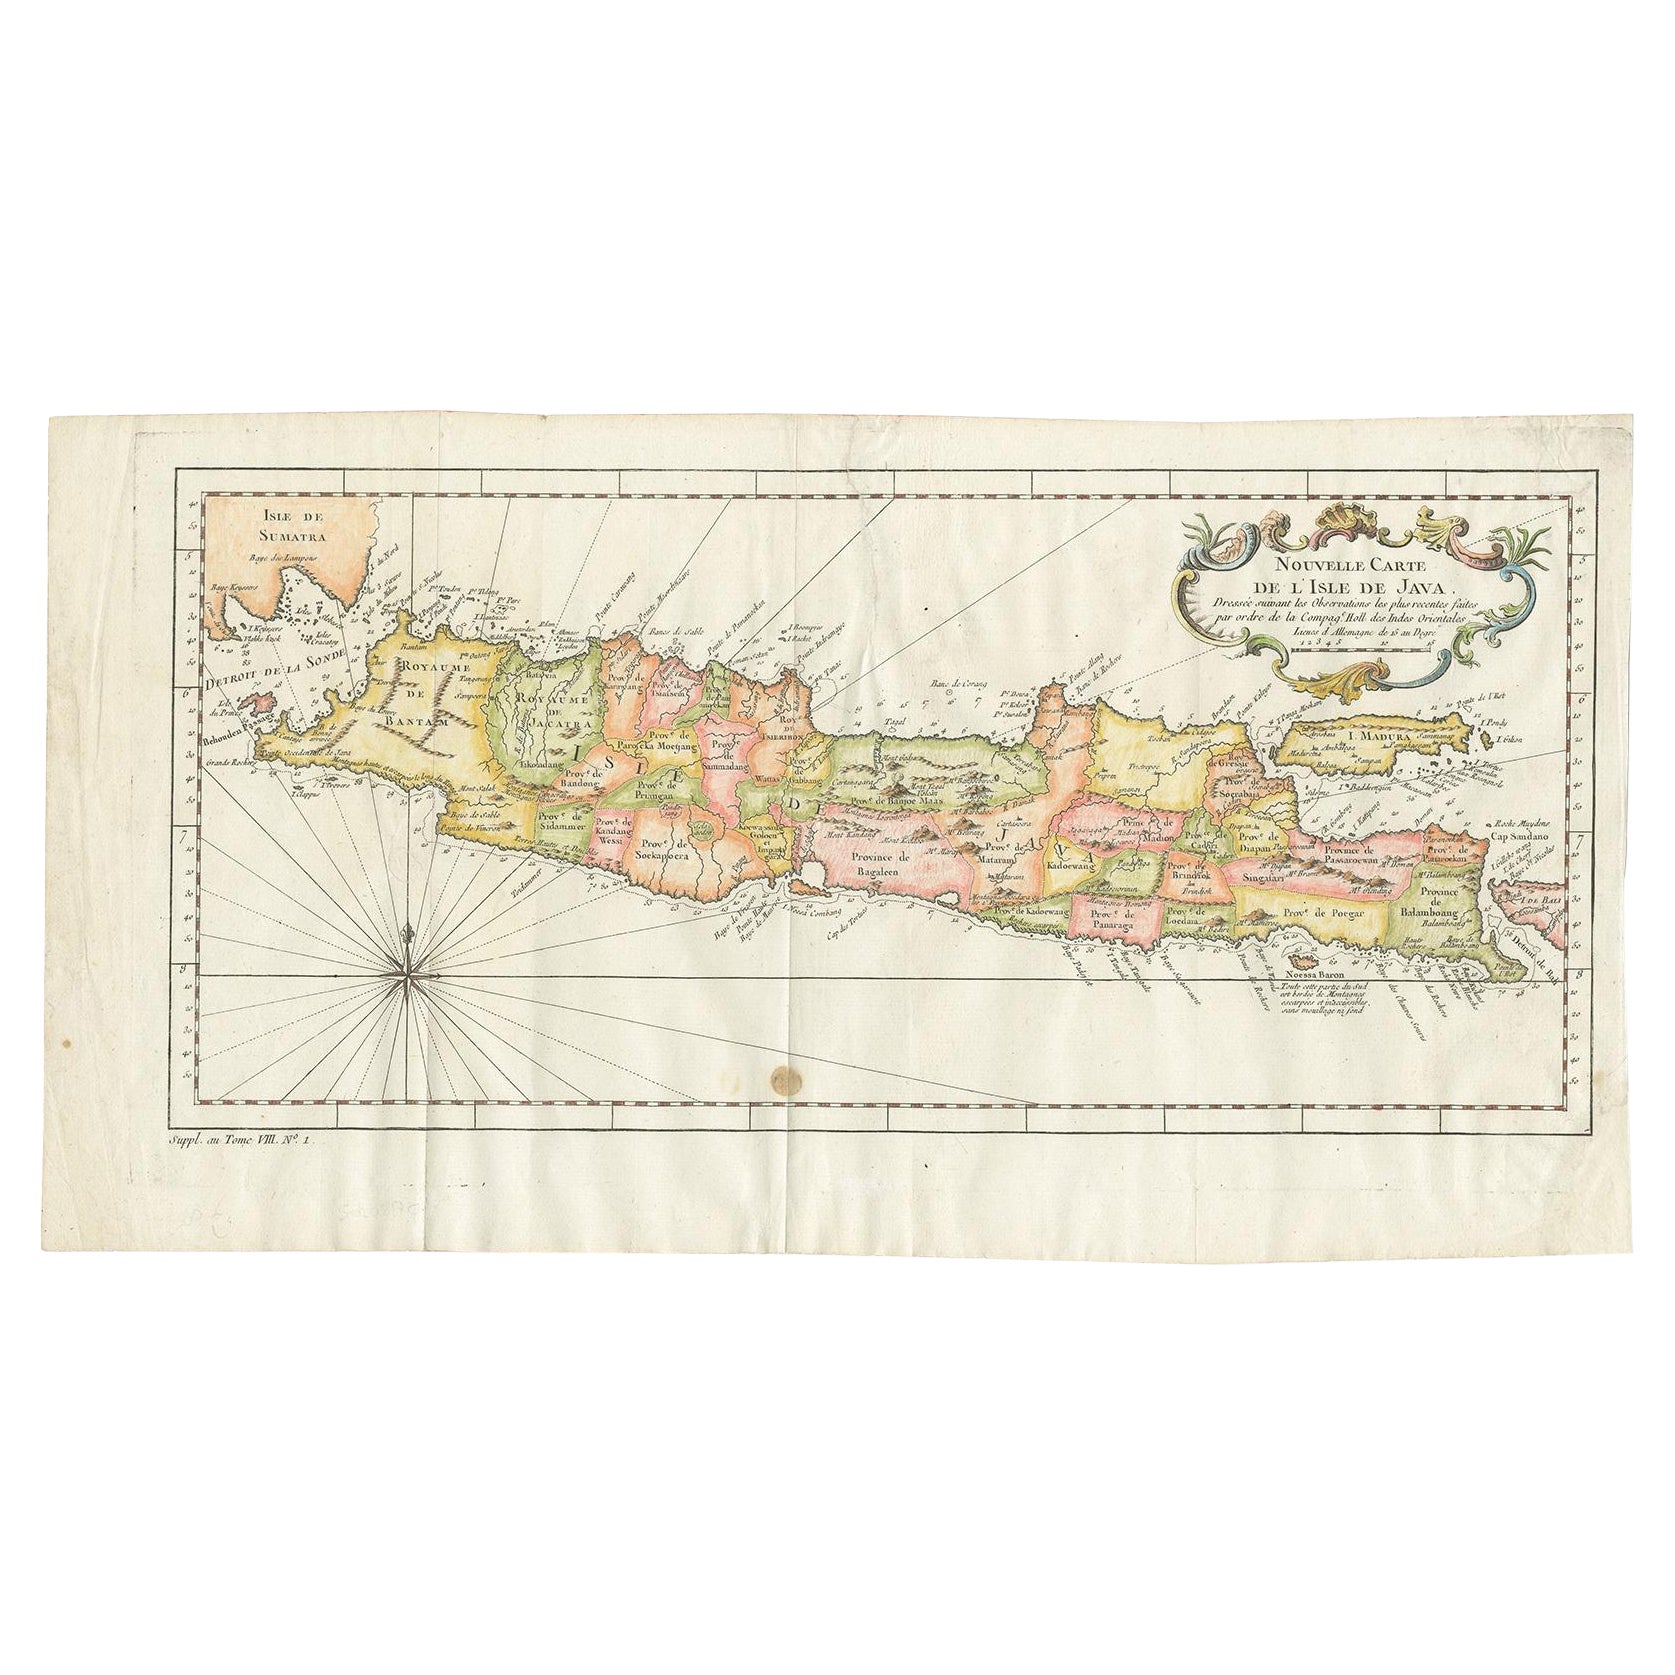 Antique Colourful Map of the Island of Java and Madura, Indonesia, C.1760